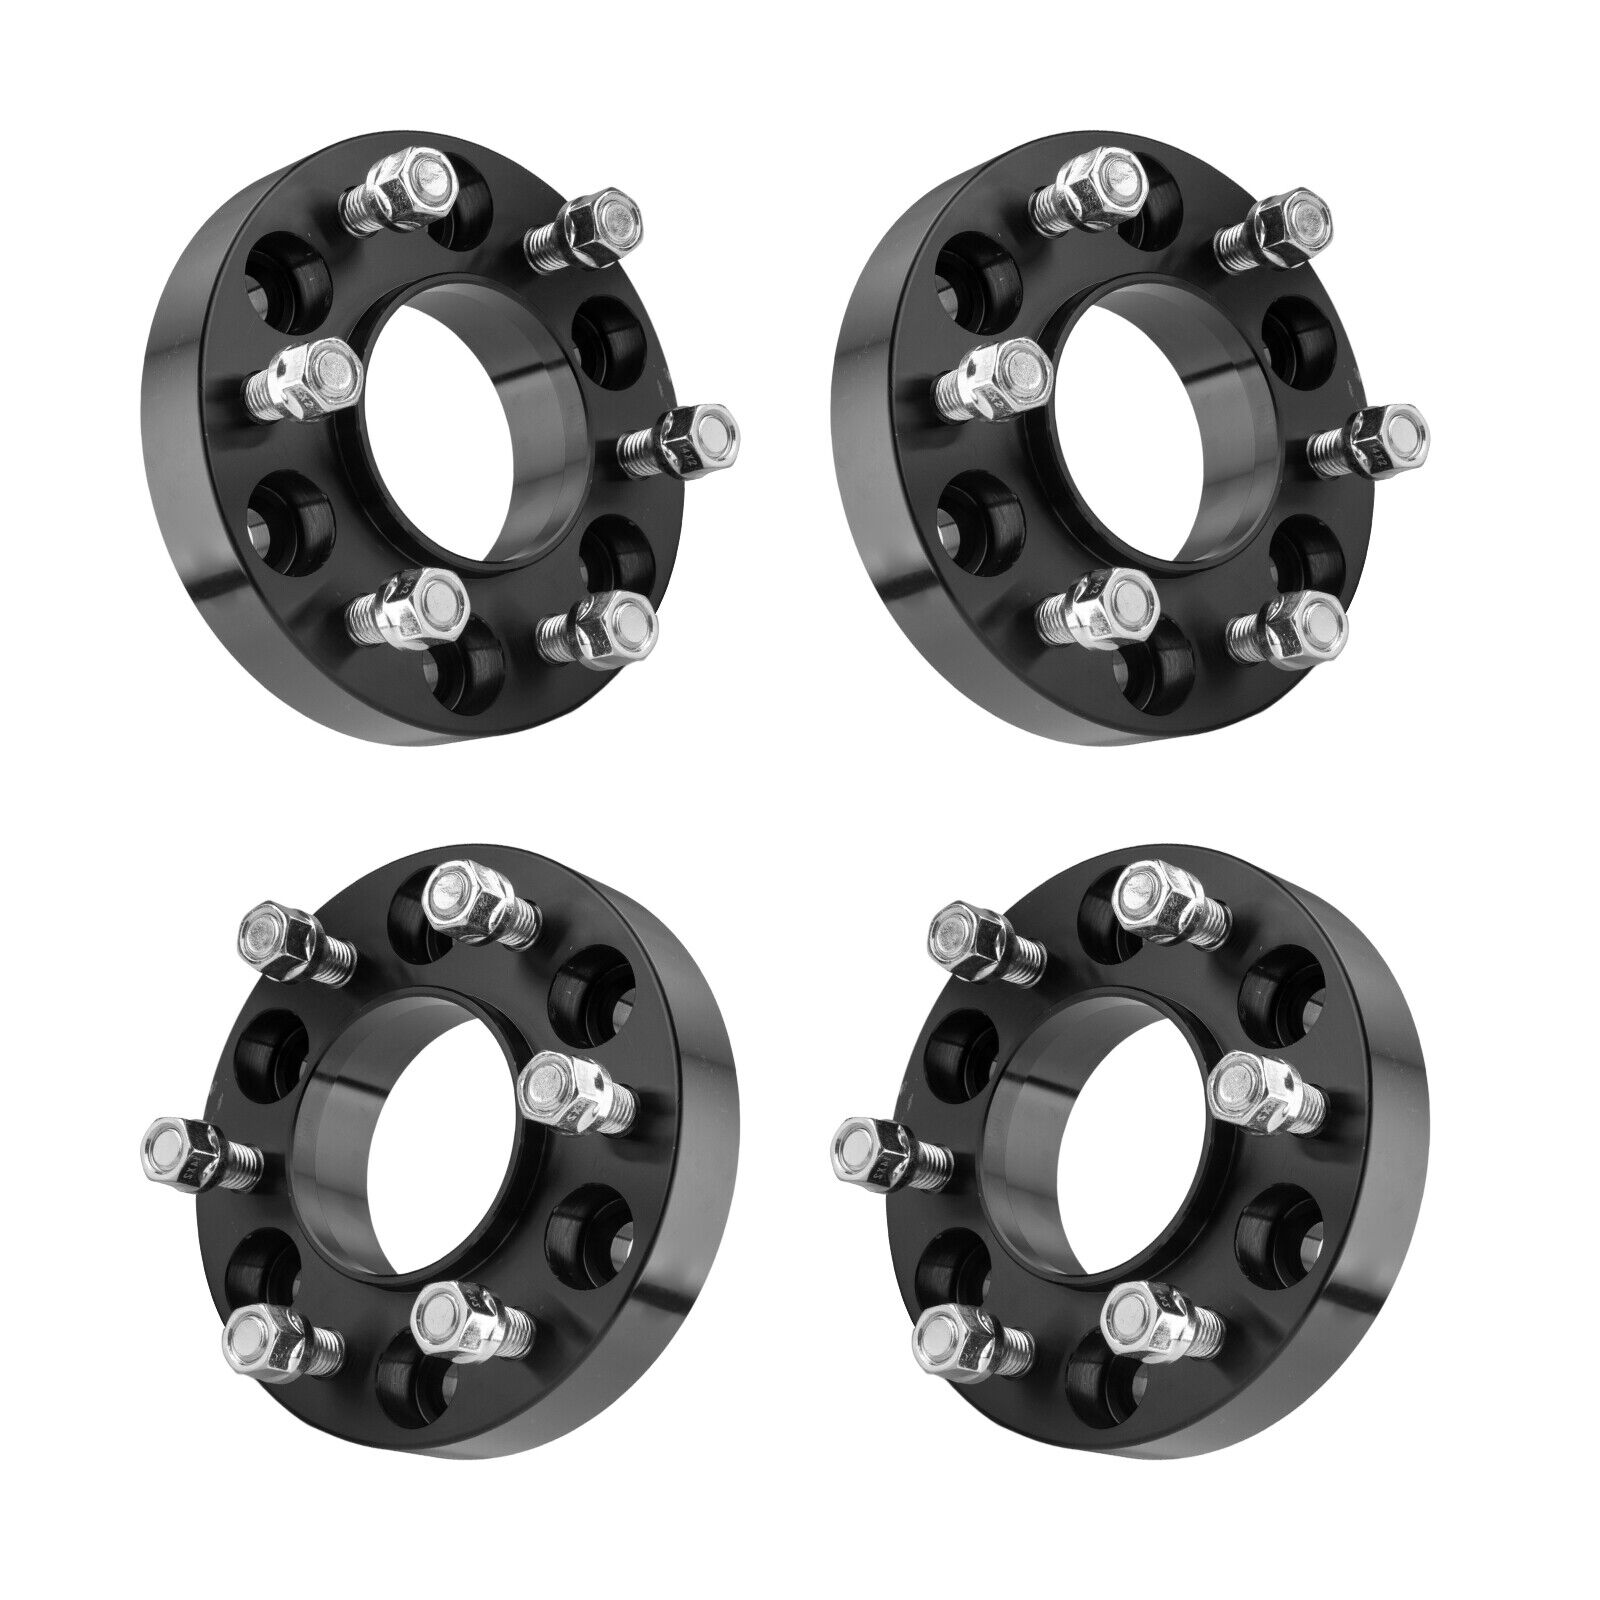 4pcs Wheel Spacers Adapters for Ford F-150 Expedition Lincoln Navigator Mark LT